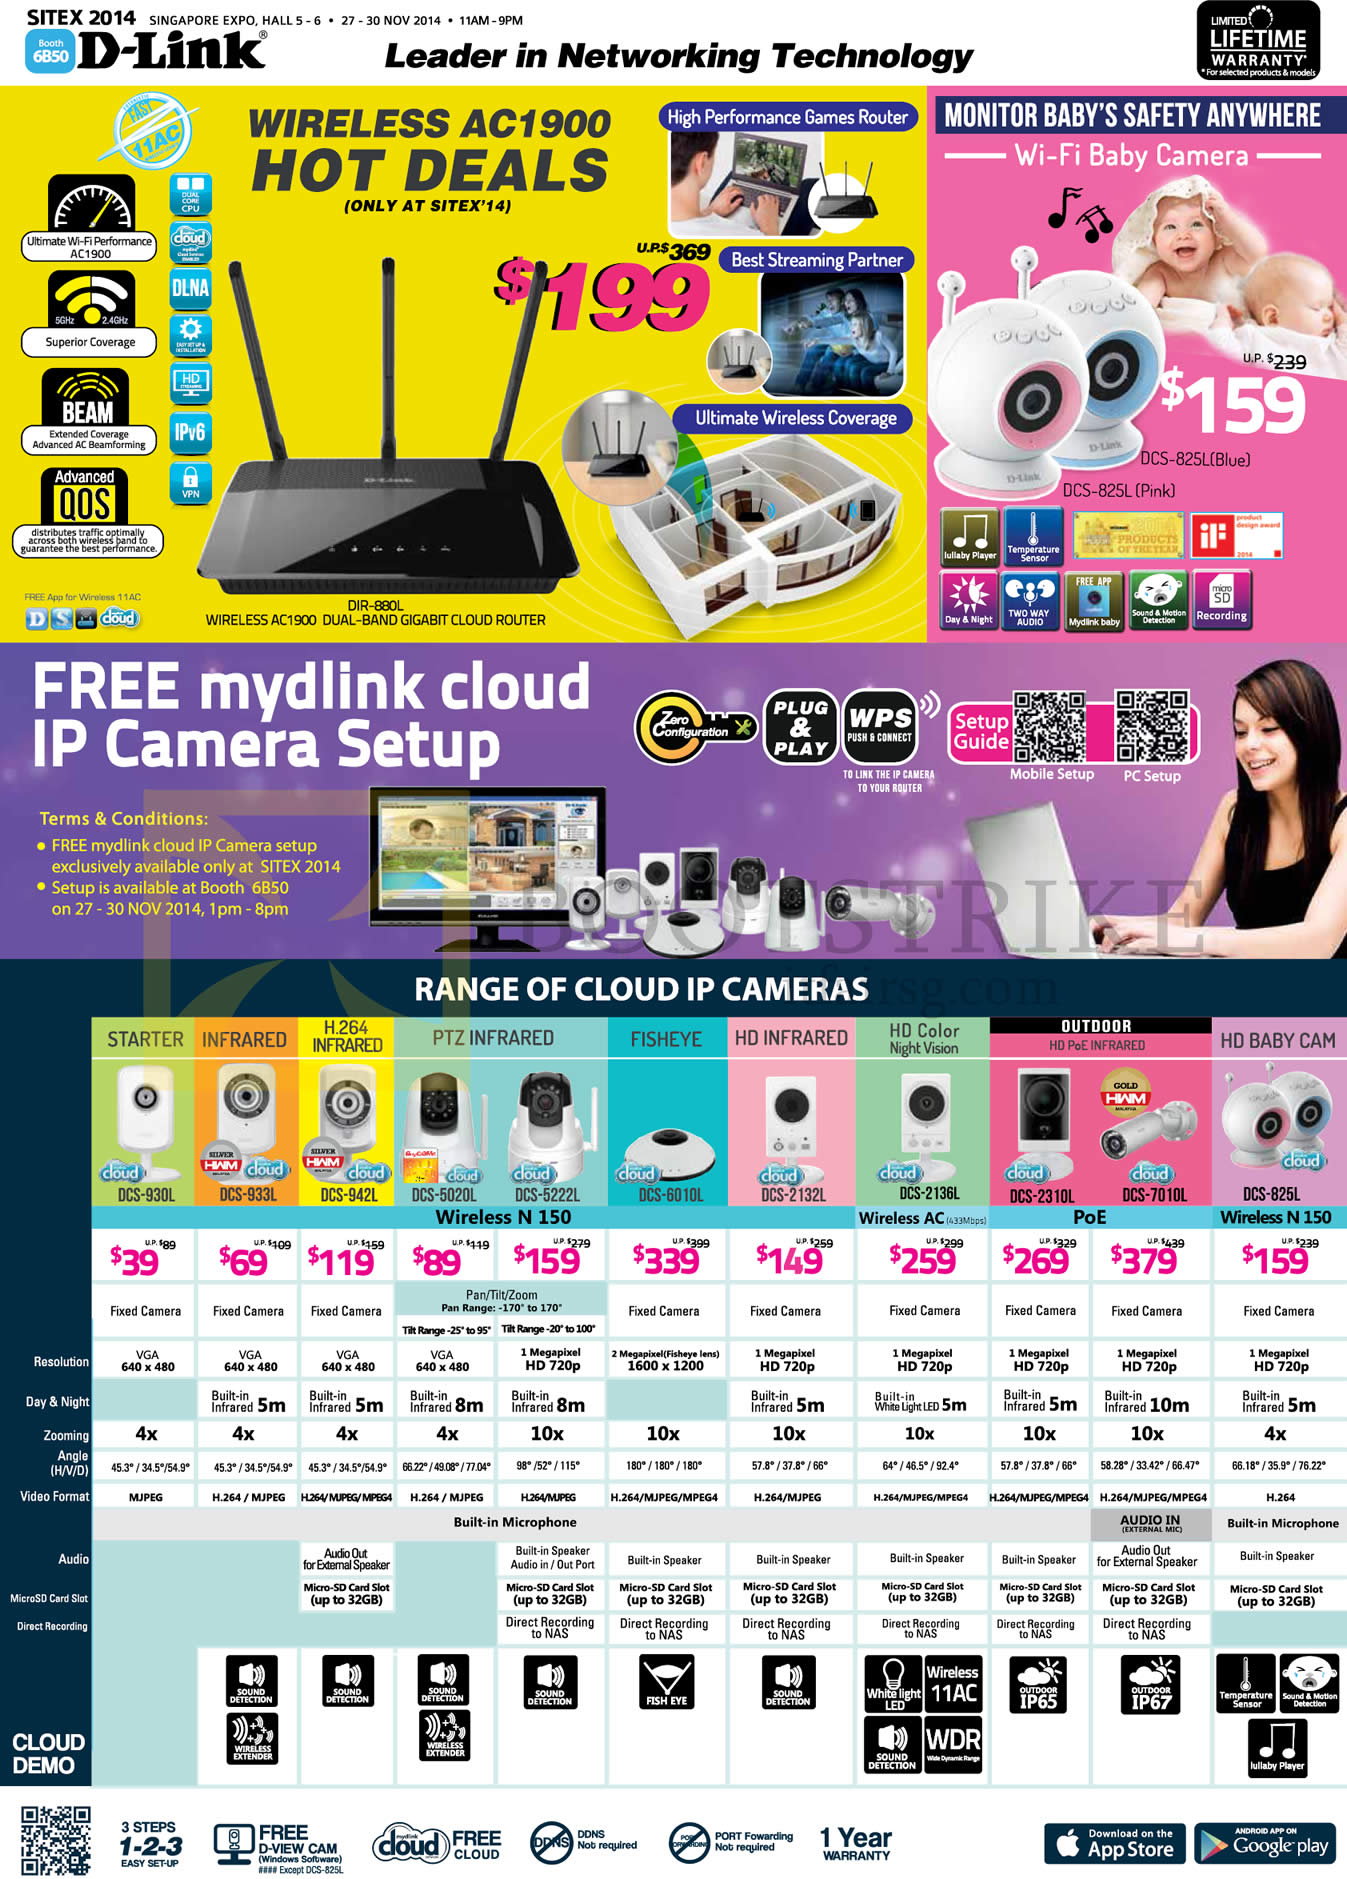 SITEX 2014 price list image brochure of D-Link Networking Wireless Router, Baby Camera, IPCam Cloud IP Cameras DCS